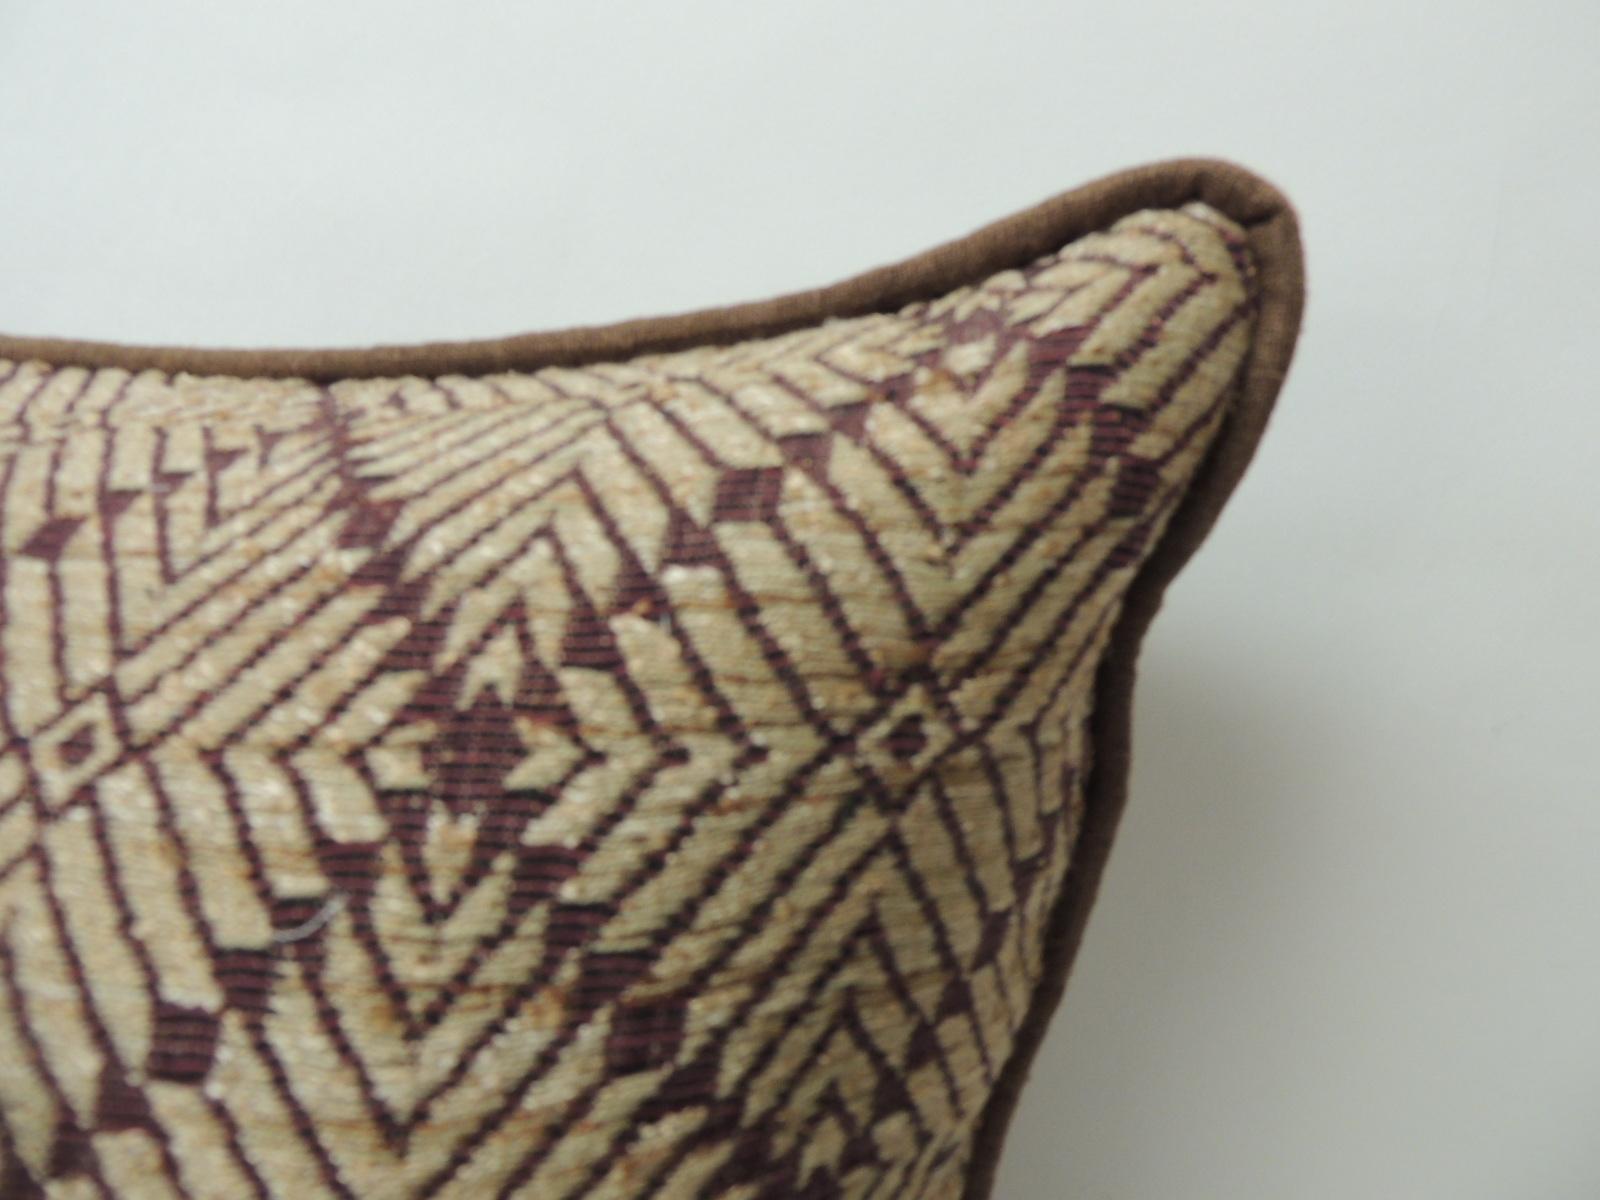 Tribal Vintage Dark Brown African Woven Artisanal Textile Embroidery Decorative Pillow For Sale